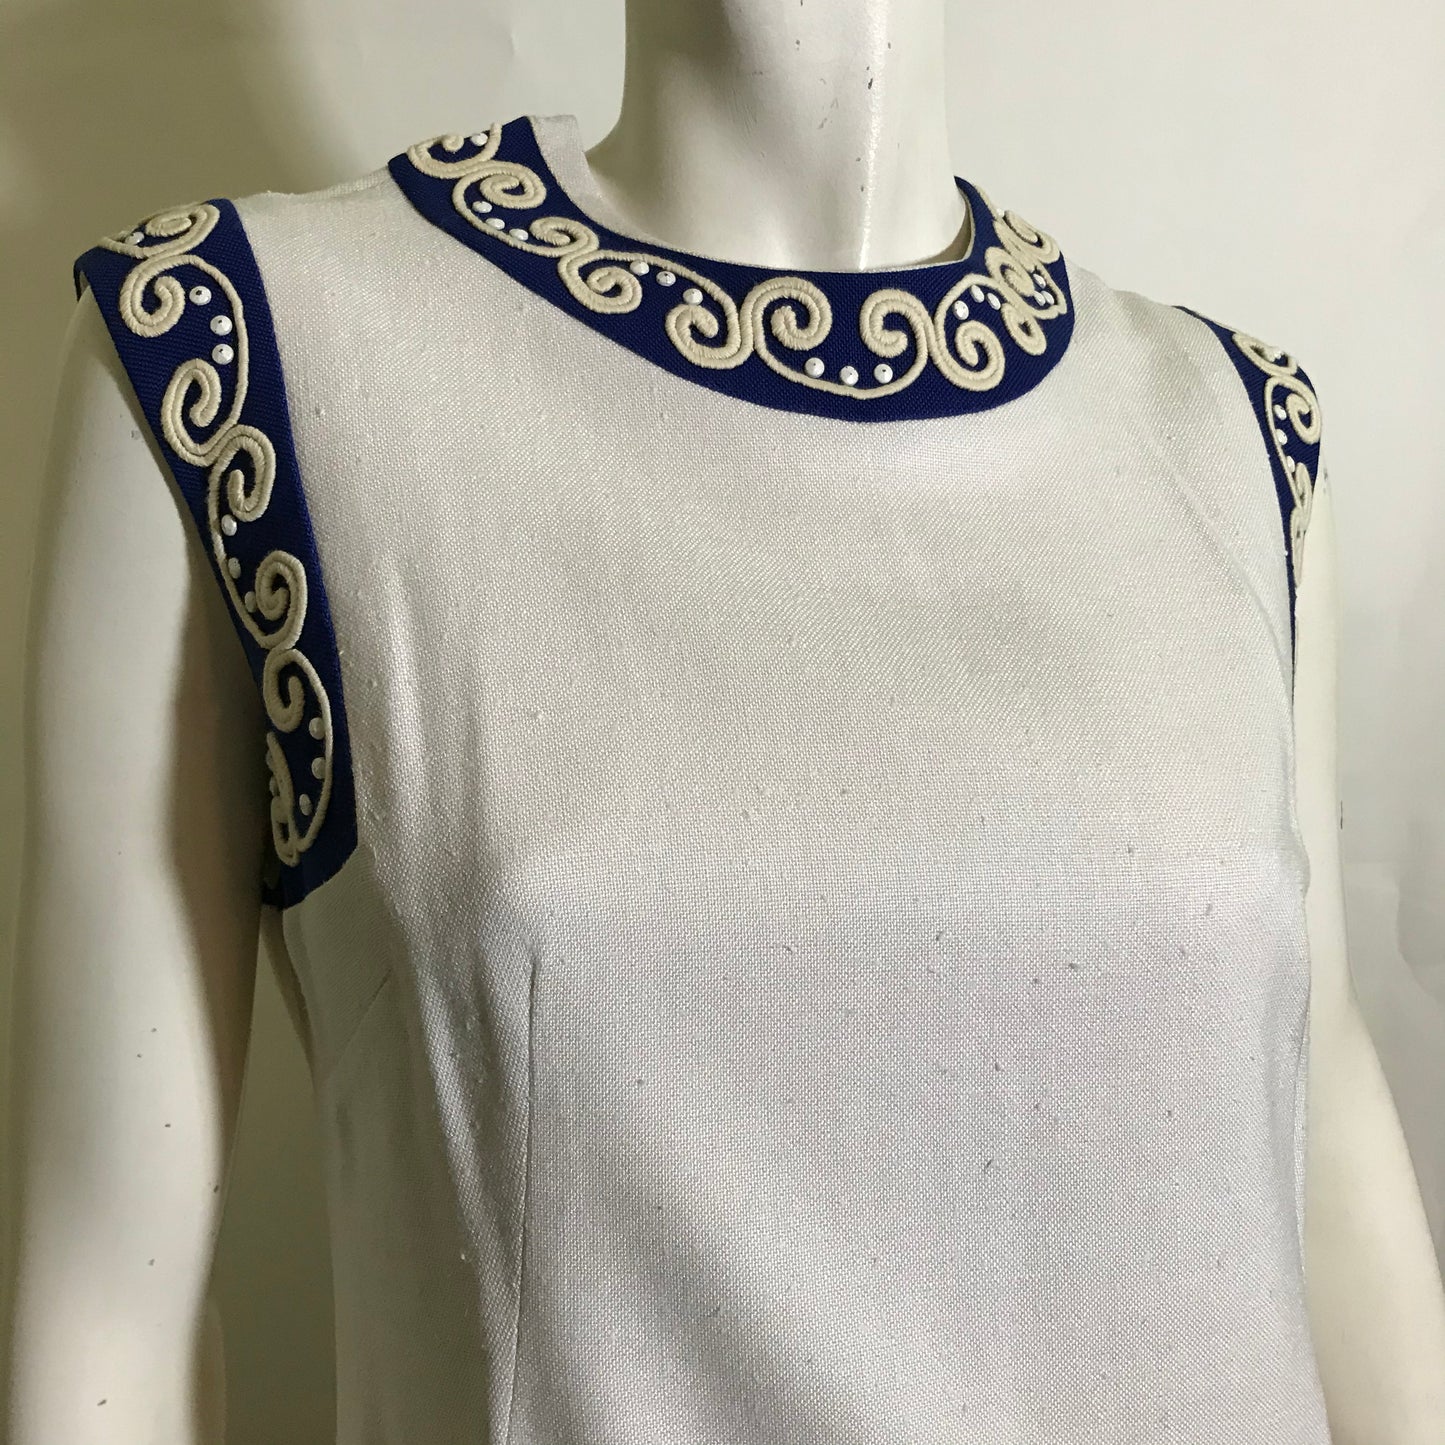 Sleeveless White Linen Weave Rayon Shift Dress with Blue and White Beaded Trim circa 1960s